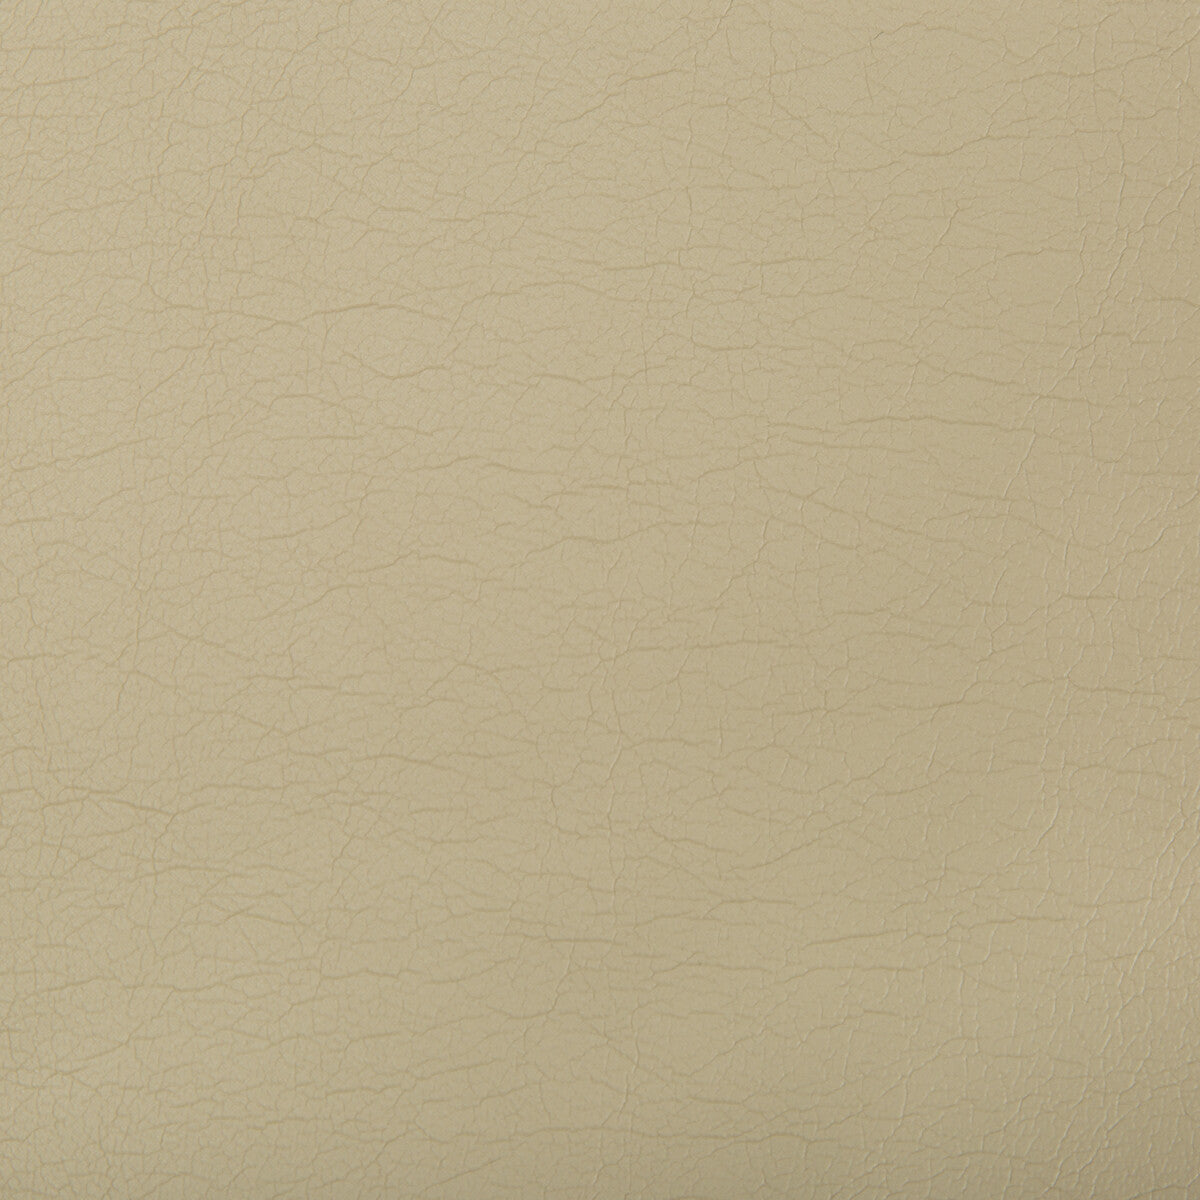 Optima fabric in sandstone color - pattern OPTIMA.1116.0 - by Kravet Contract